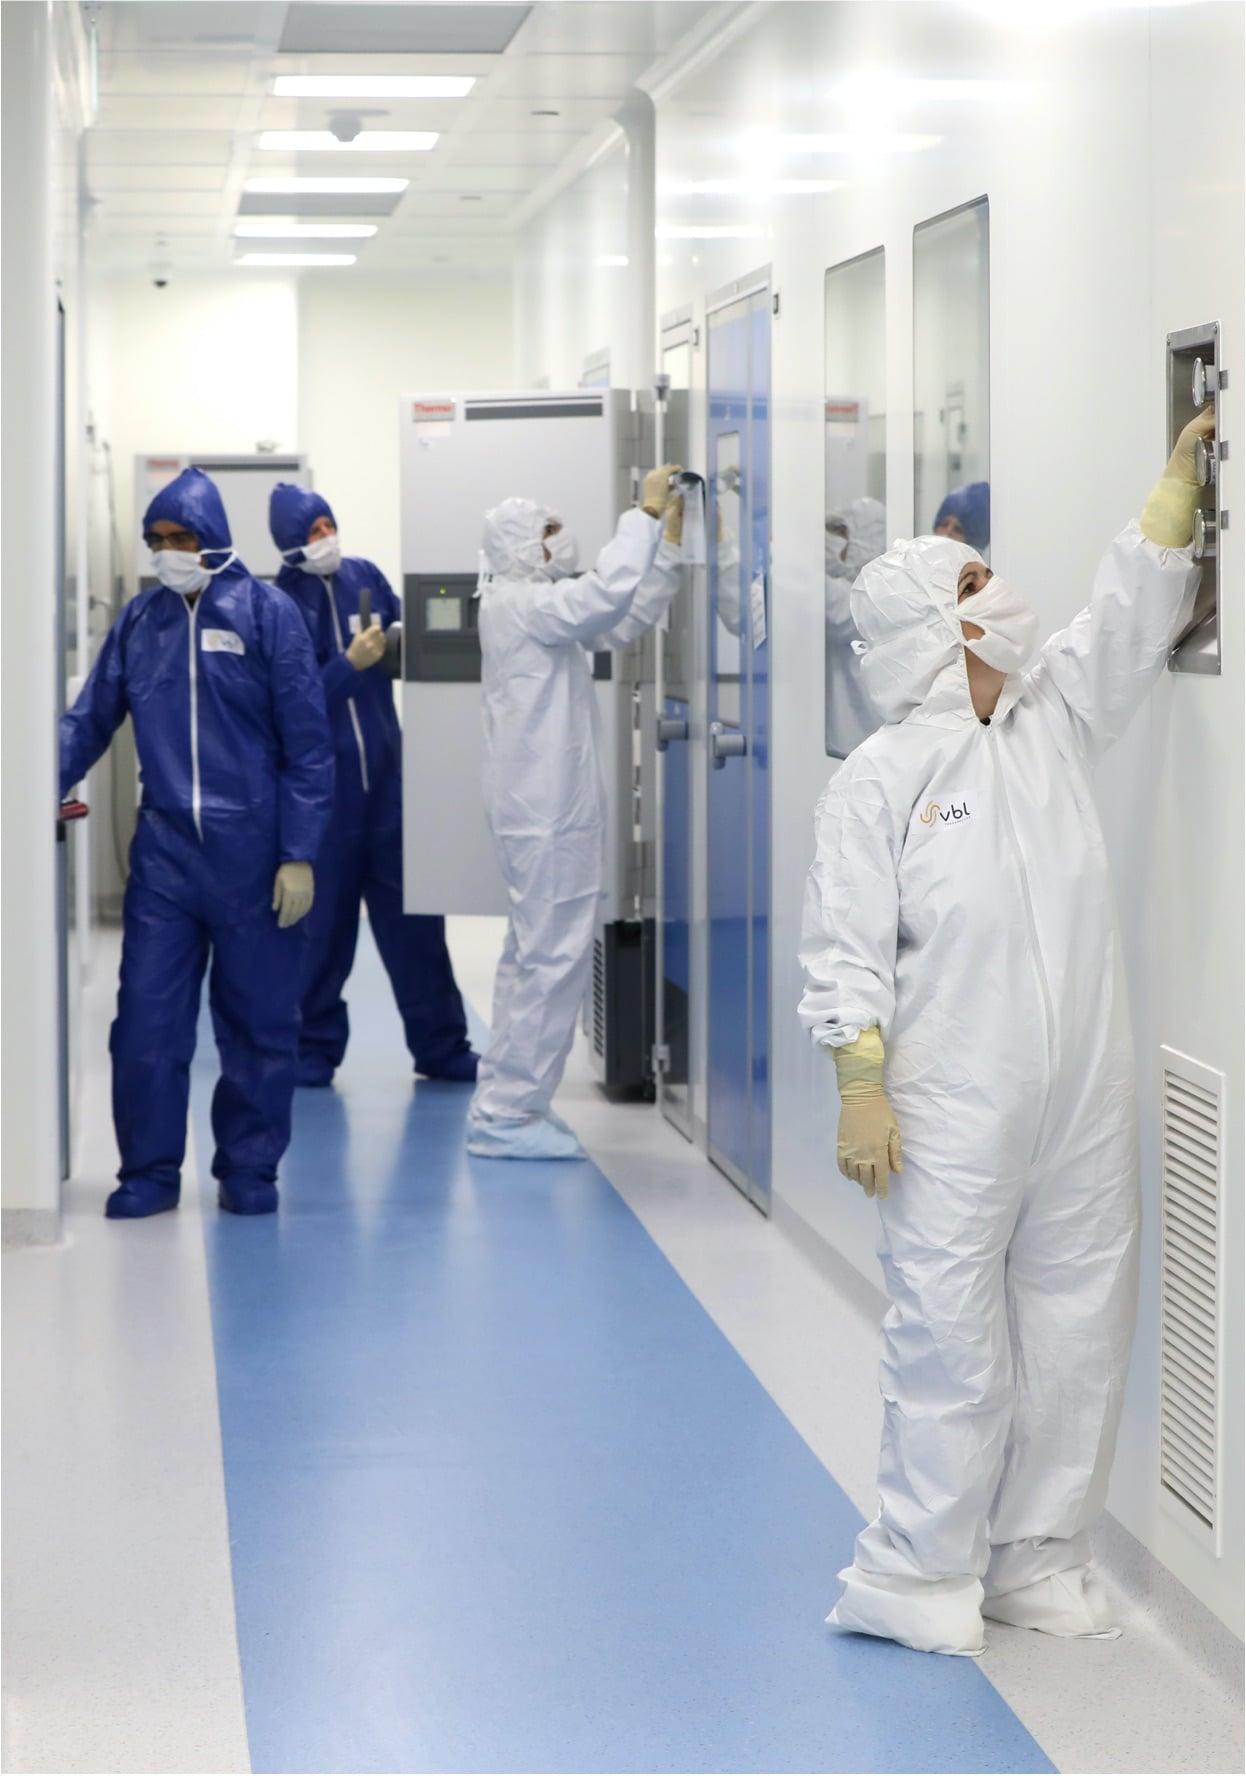 Lab technicians in blue and white lab hoodies, working in a white hallway at VBL’s production facility in Modiin, Israel.